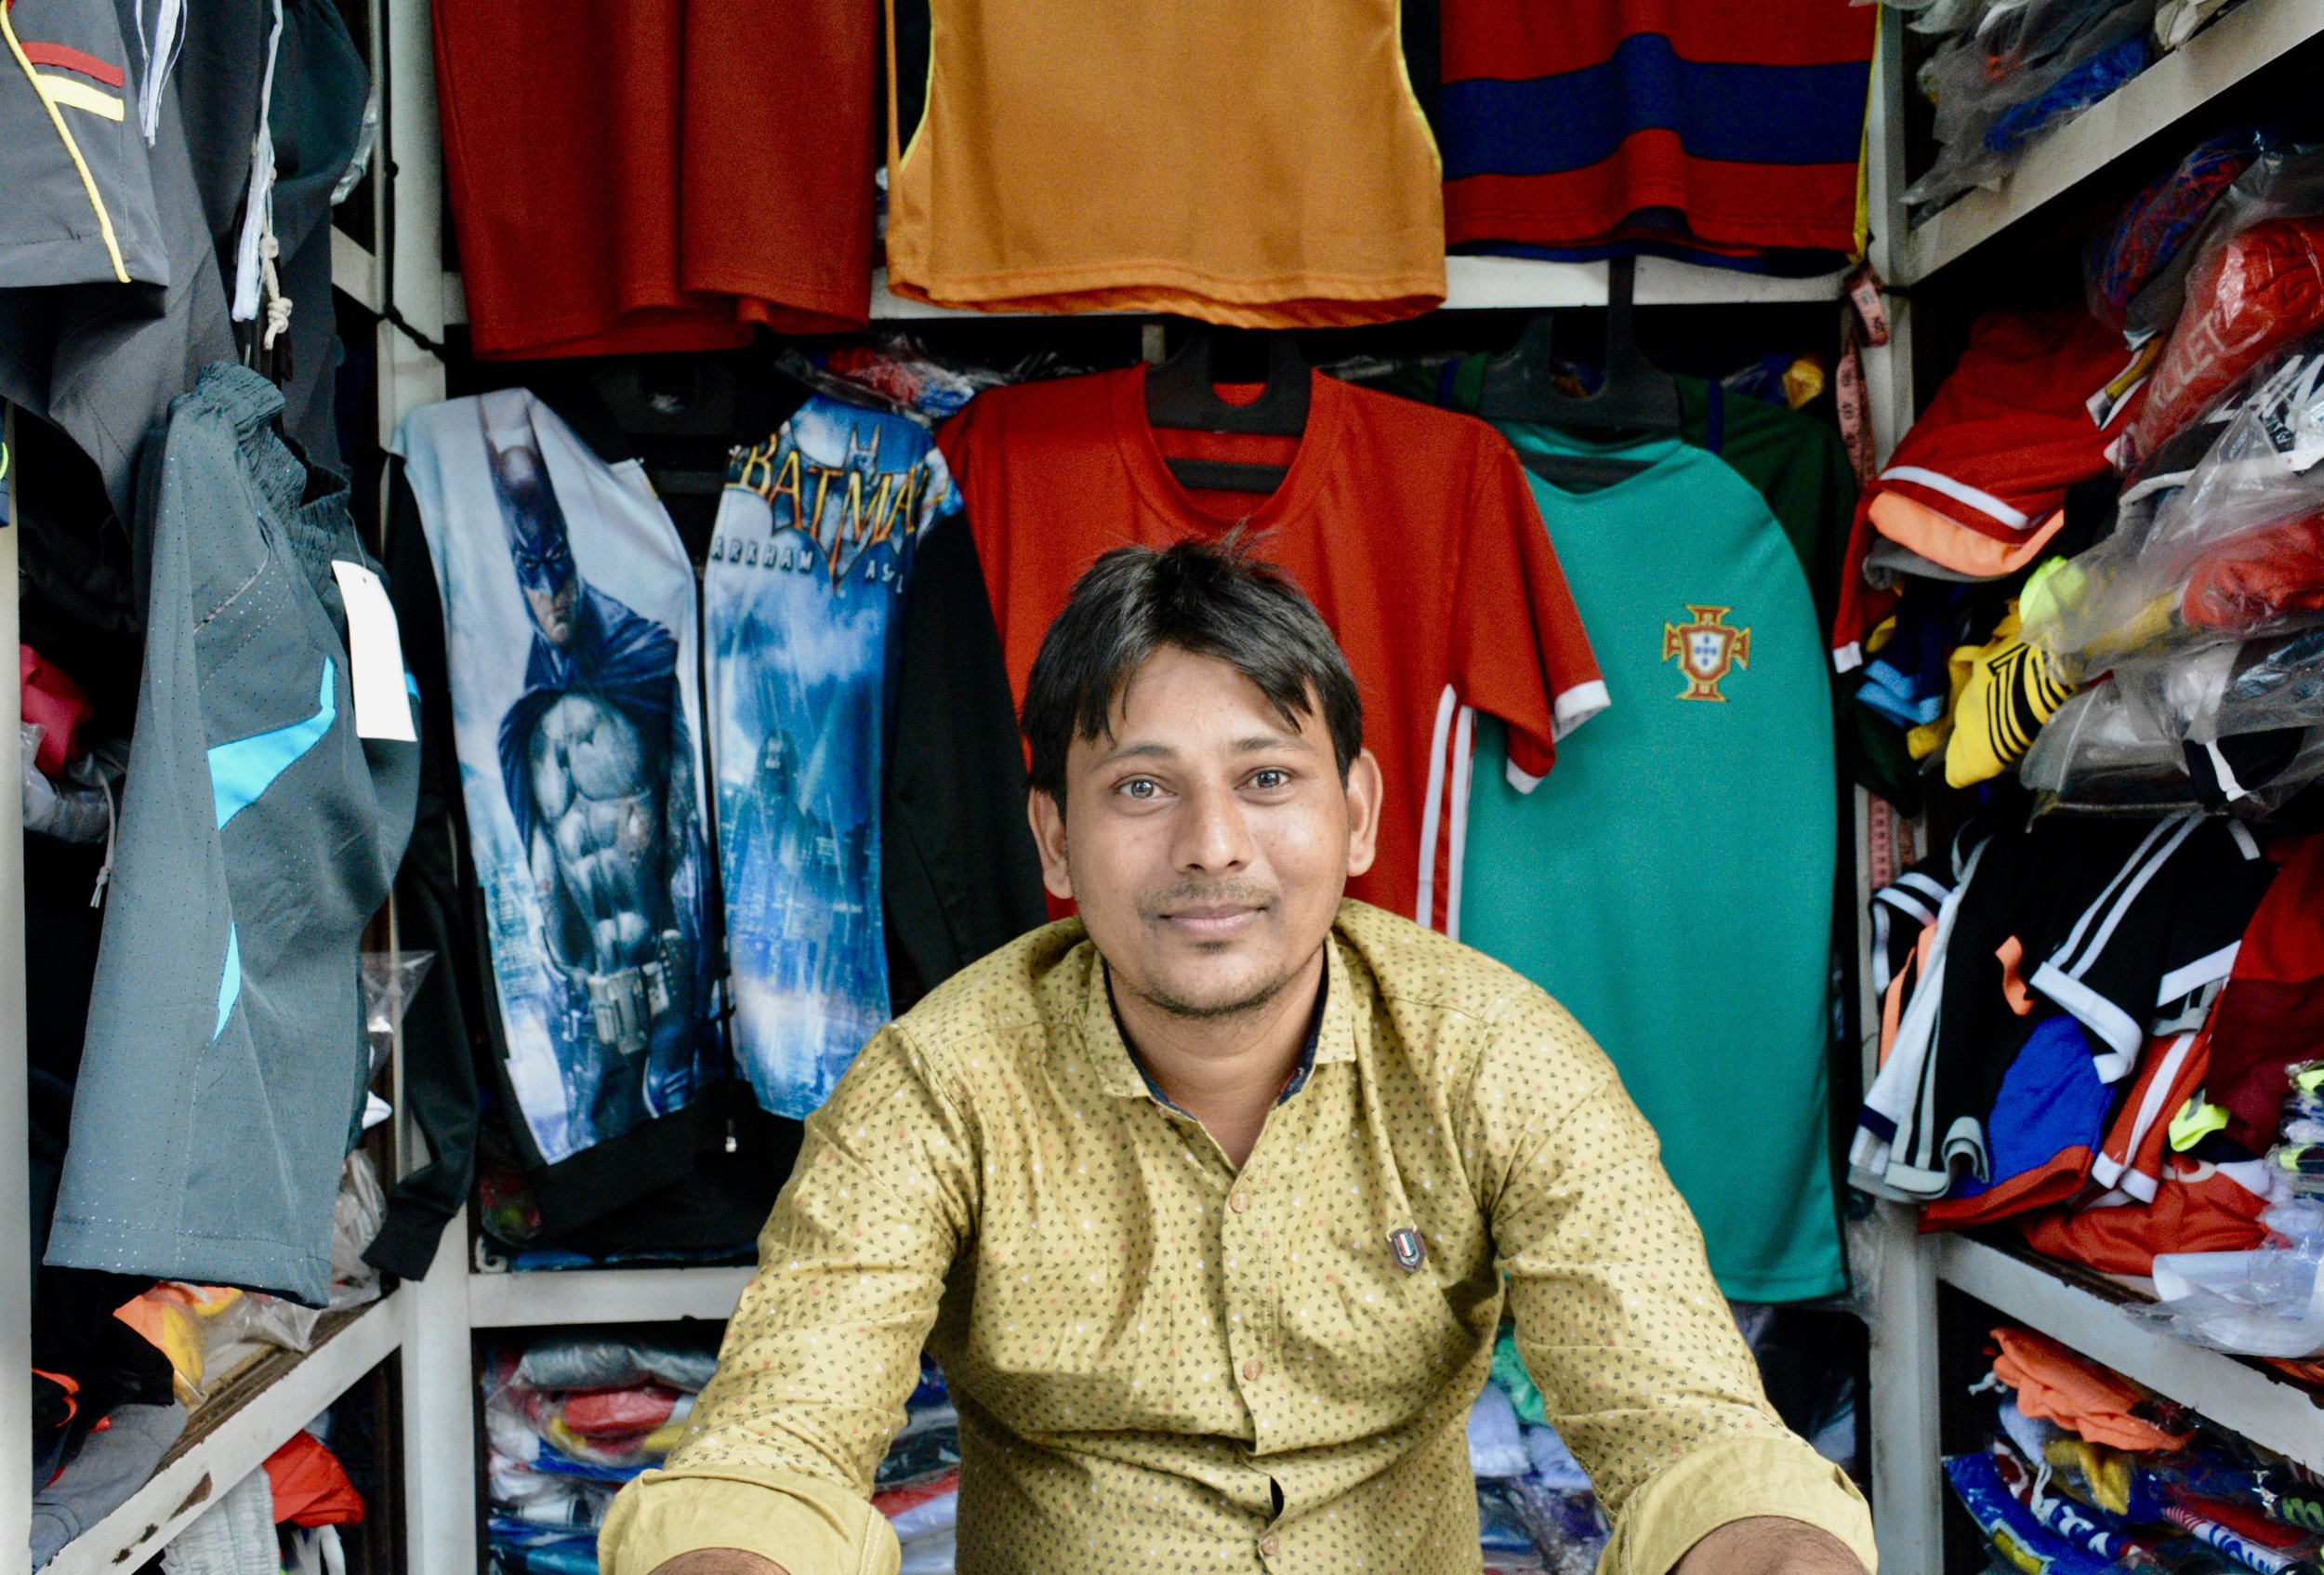  One of the Mumbai group's final interviews involved speaking to a young owner of a sports jersey stand who conducted 100% of his transactions in cash he had to lower some prices as a result of demonetization but does forsee adopting digital payment 